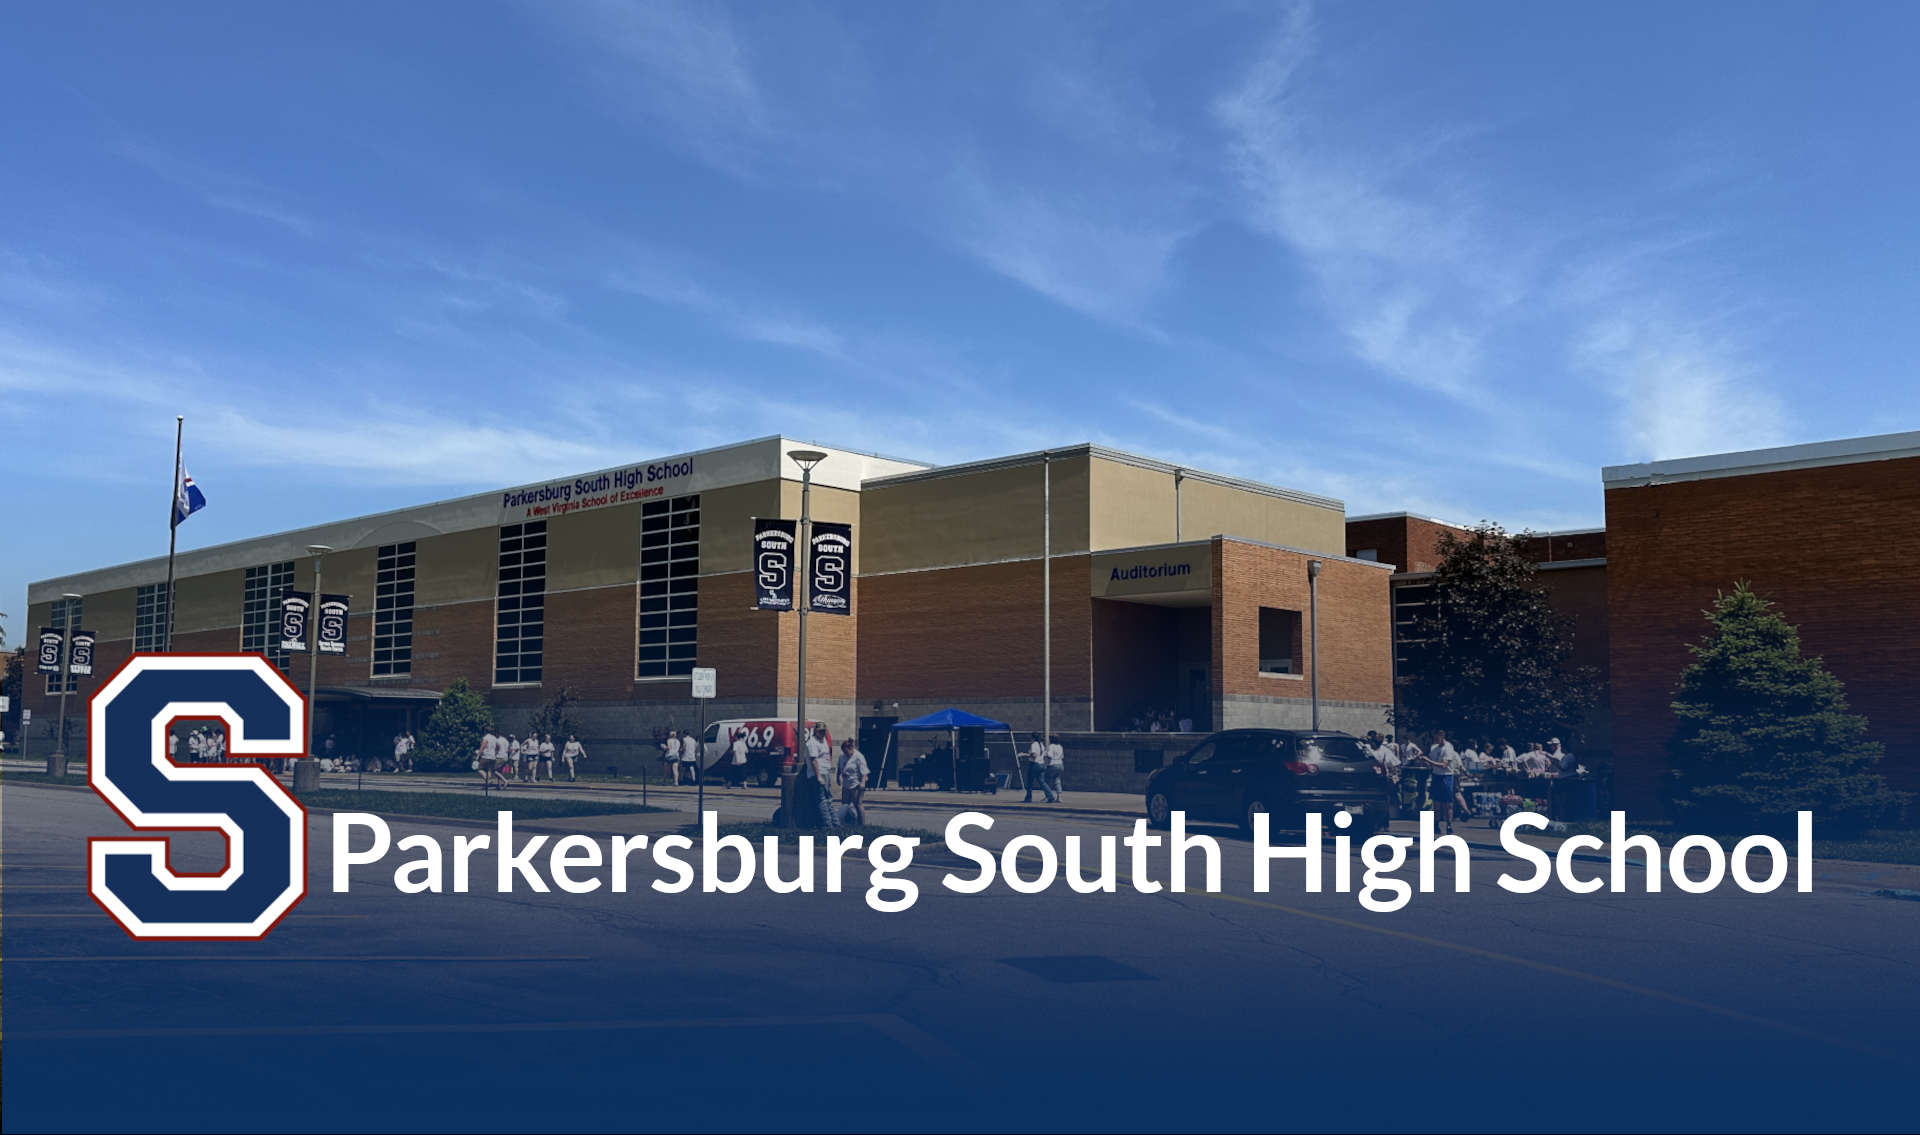 The image shows the front of the Parkersburg South High School building.